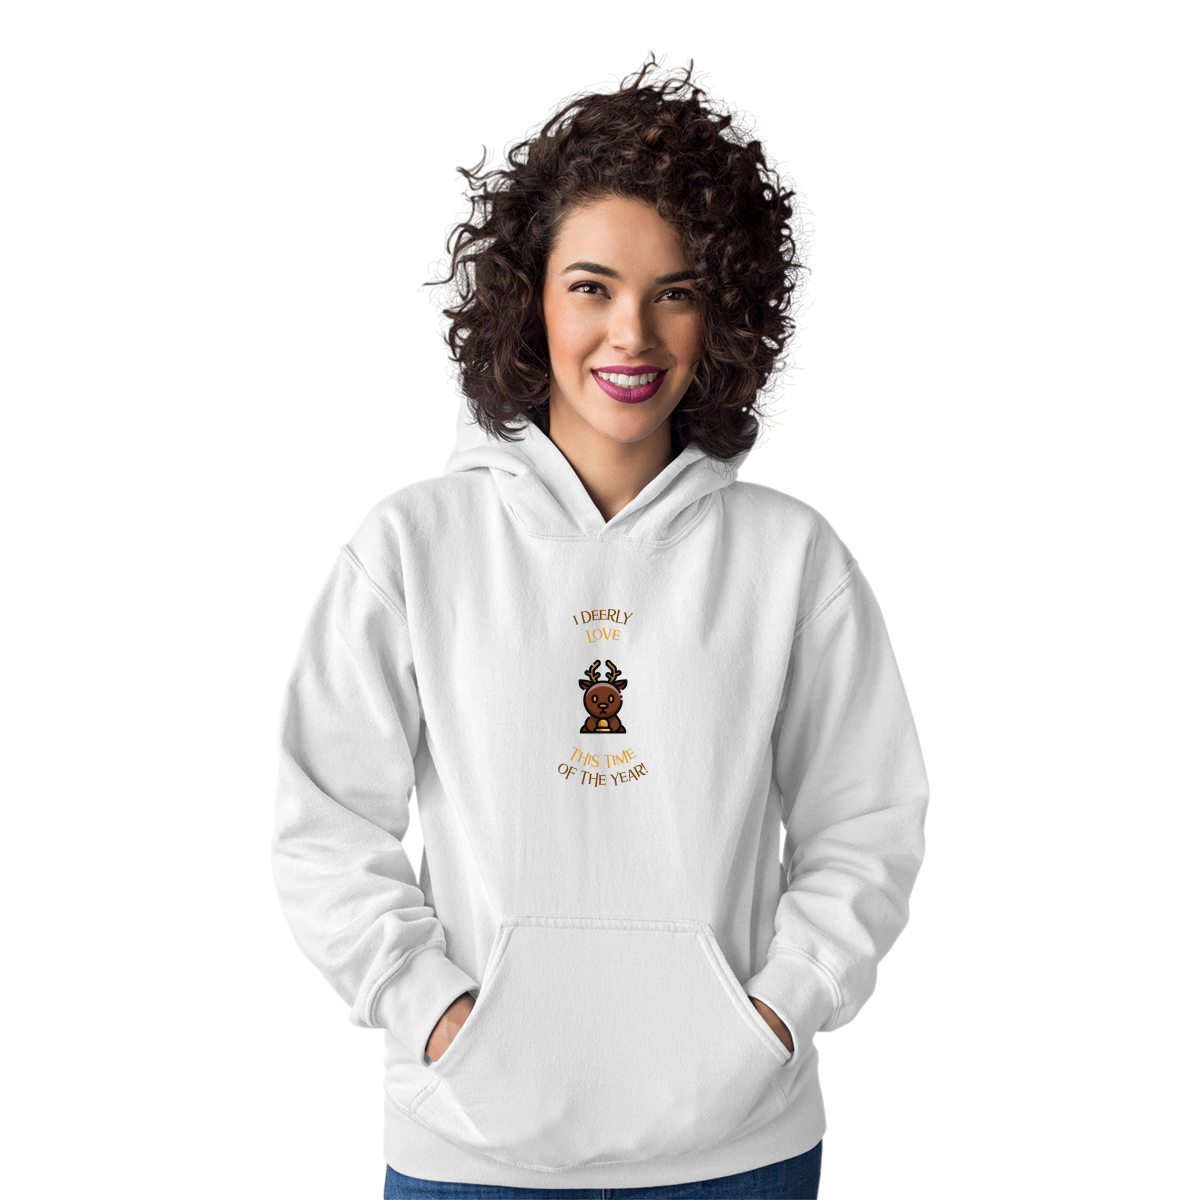 I Deerly Love This Time of the Year! Unisex Hoodie | White